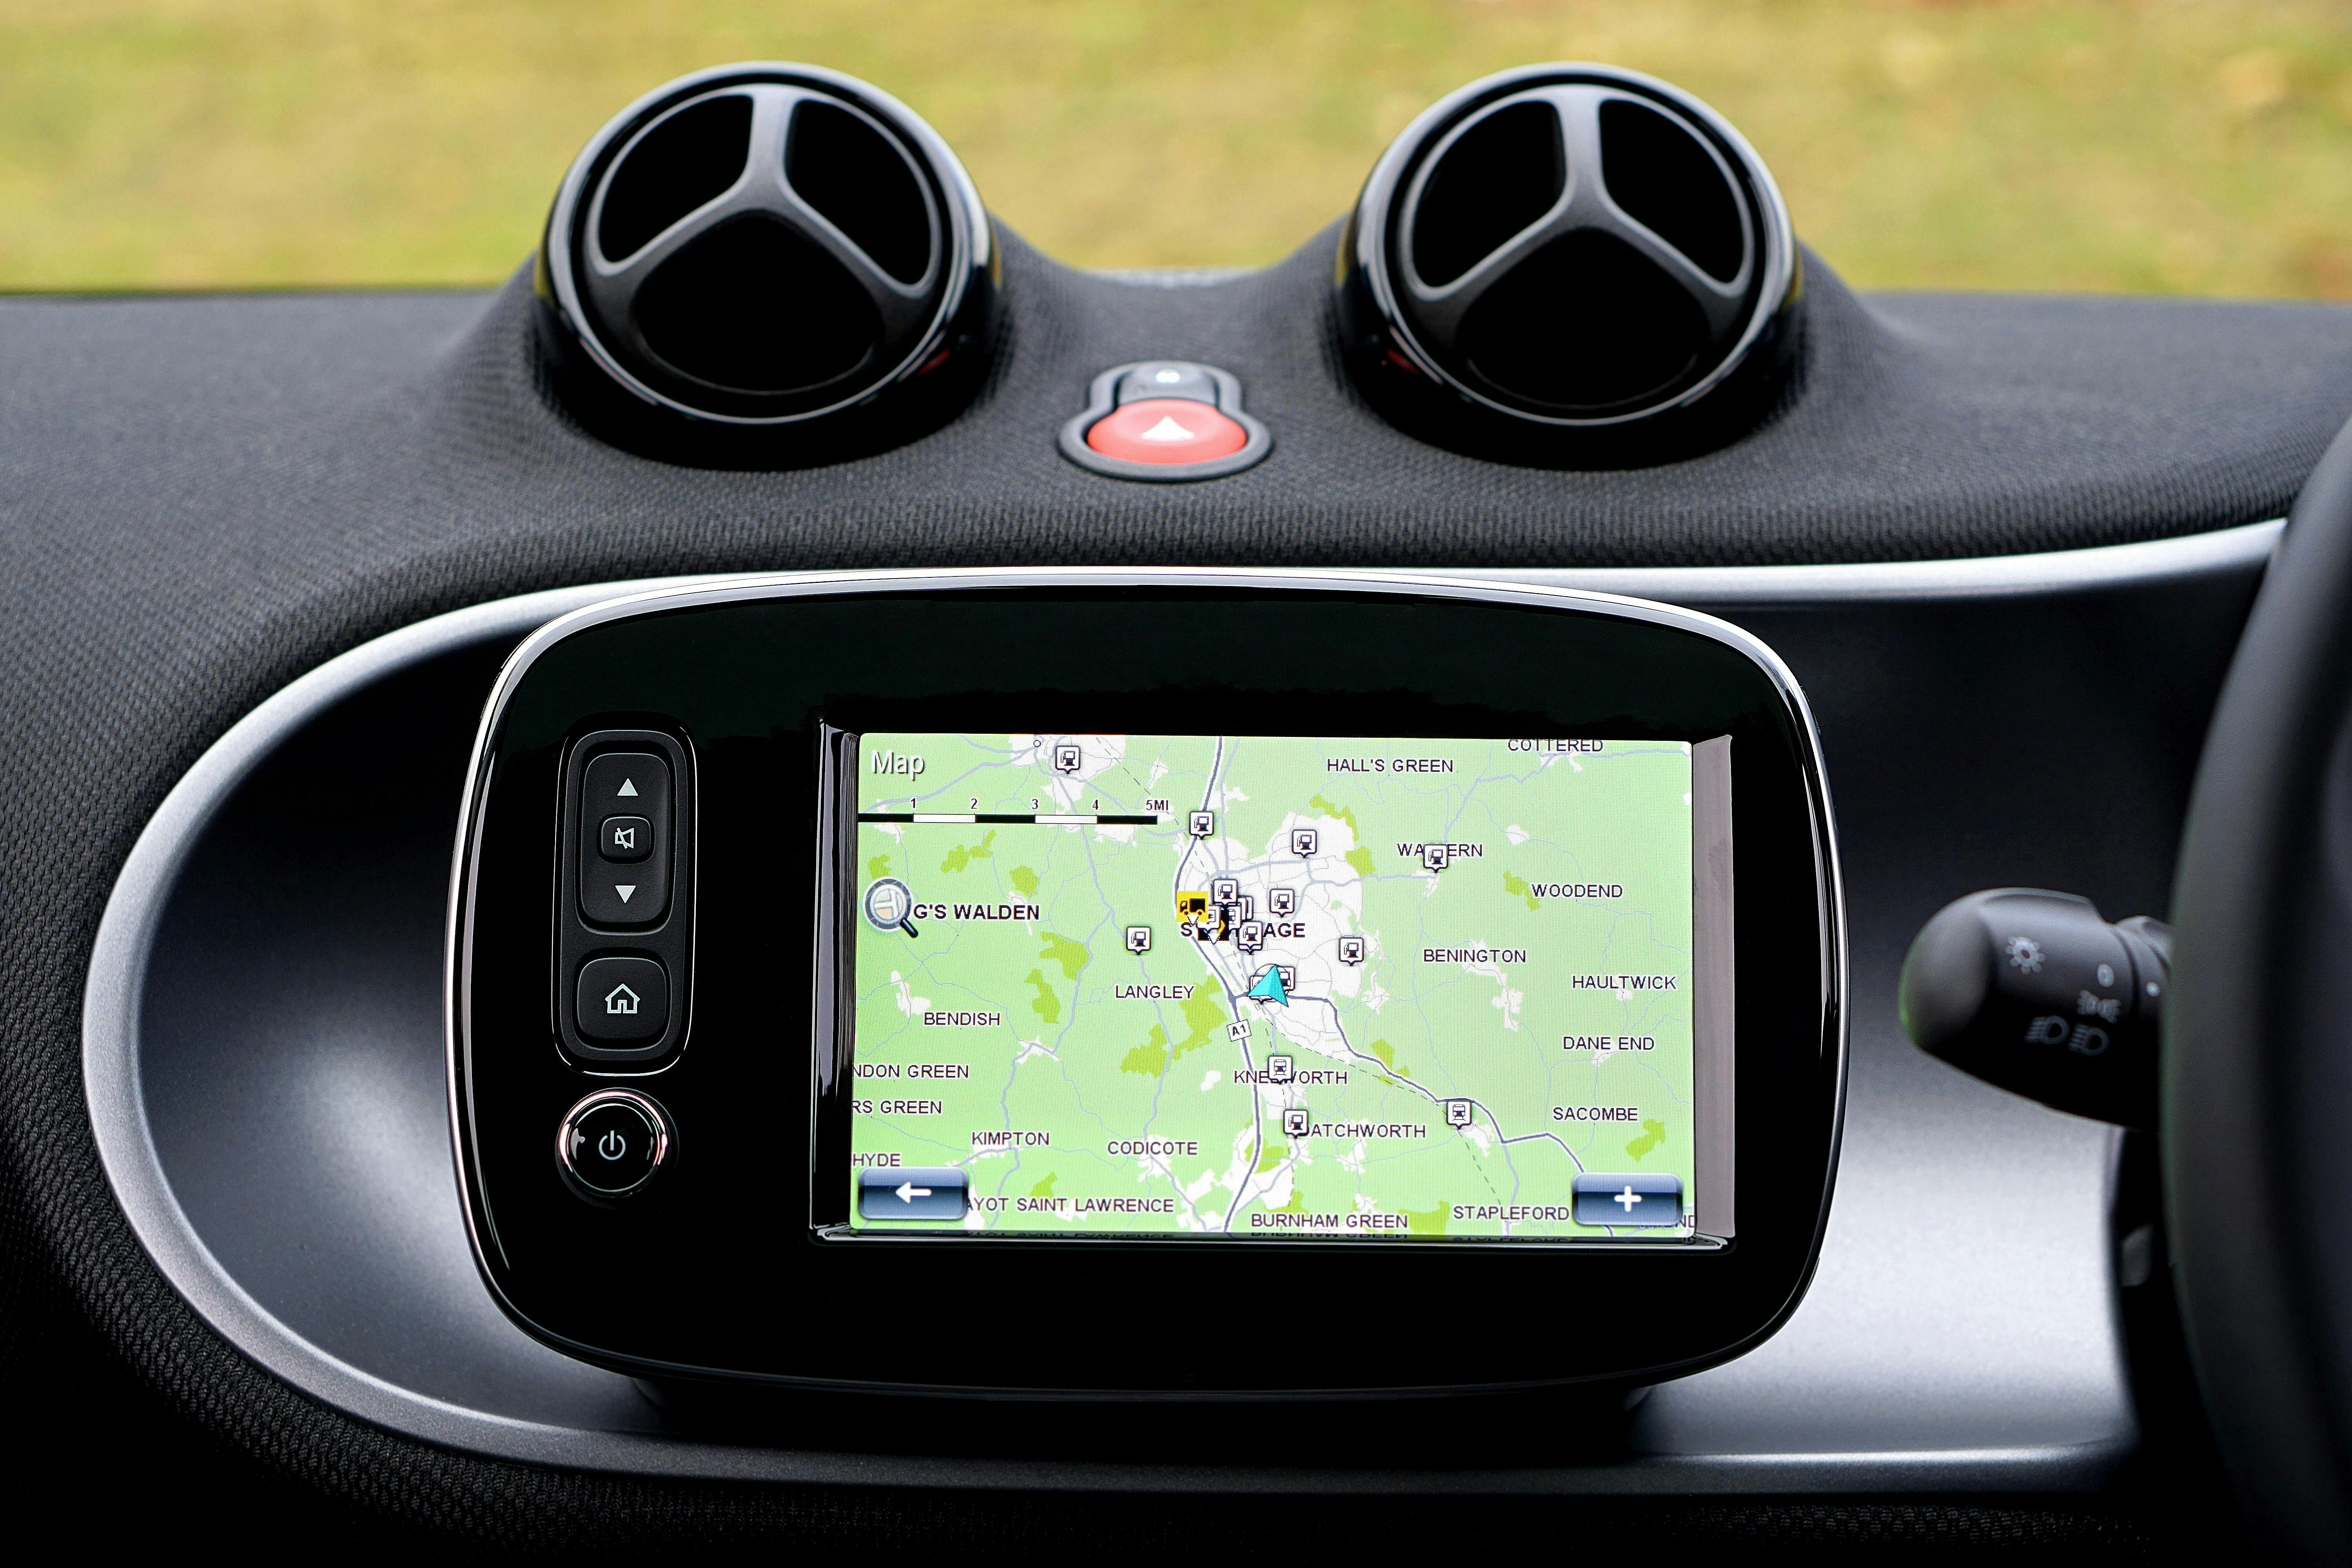 In Berlin, Google Maps, TomTom encourage car drivers to disregard the law | AlgorithmWatch